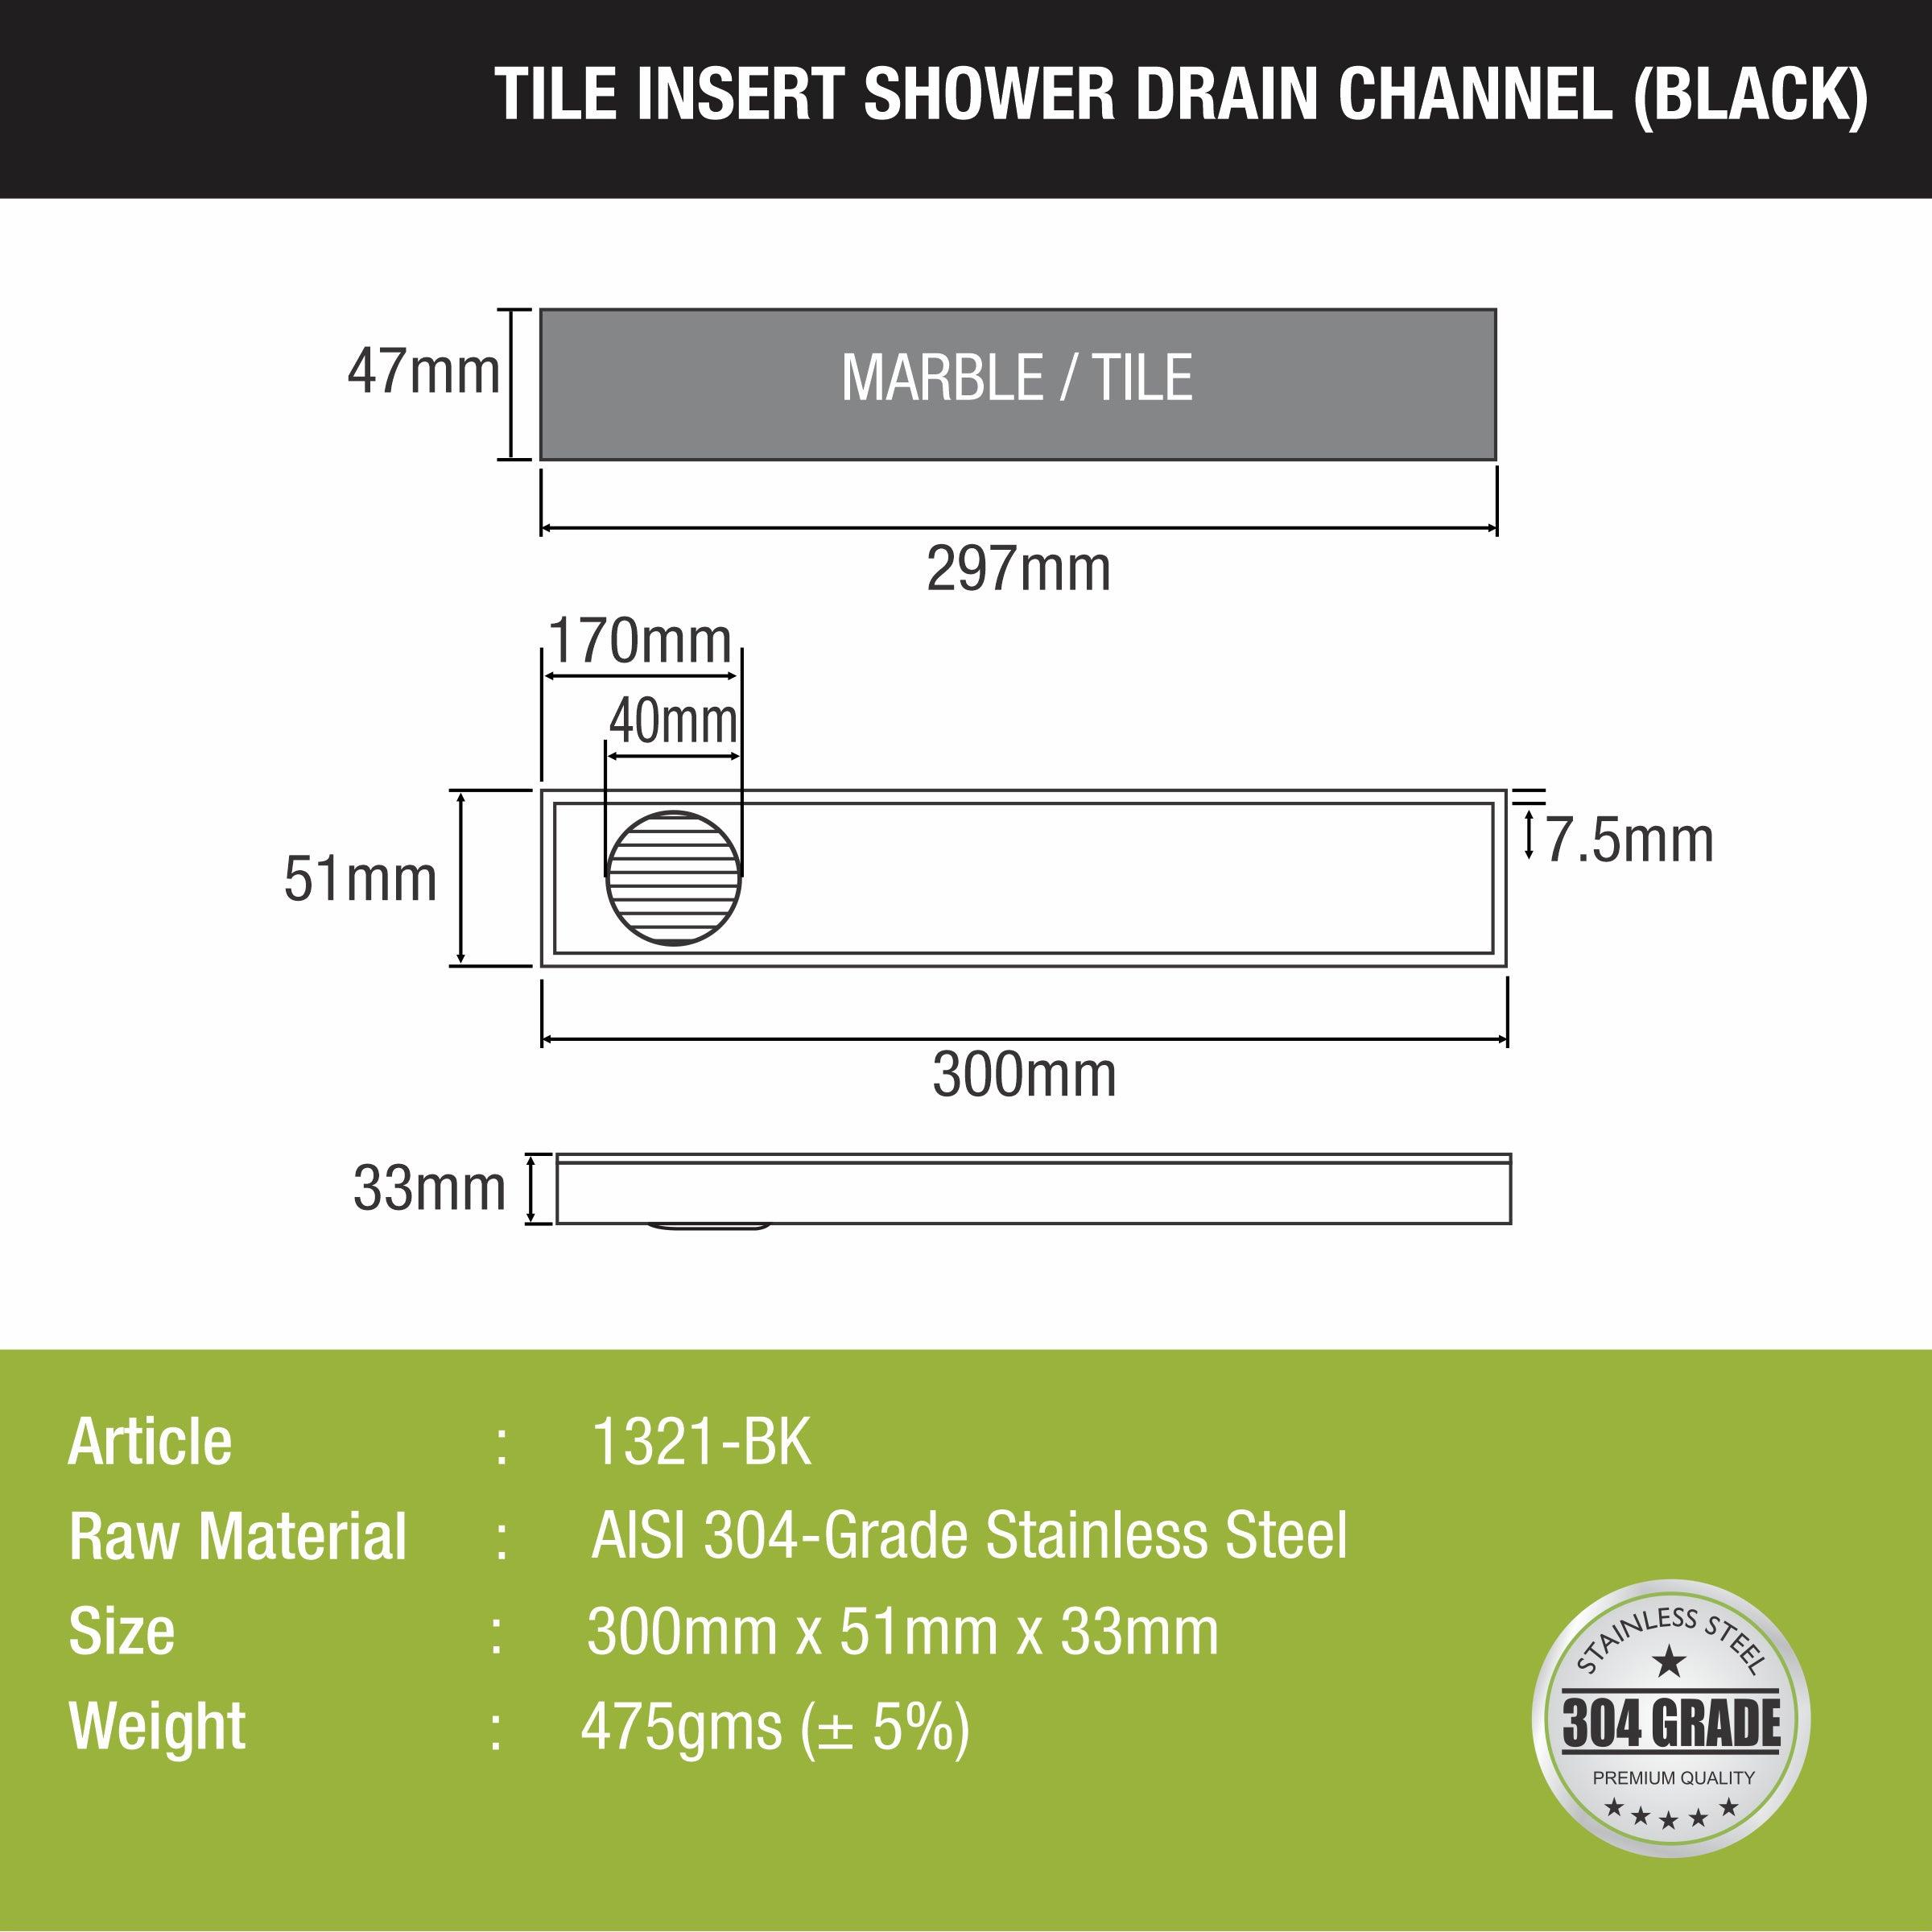 Tile Insert Shower Drain Channel - Black (12 x 2 Inches) size and measurement